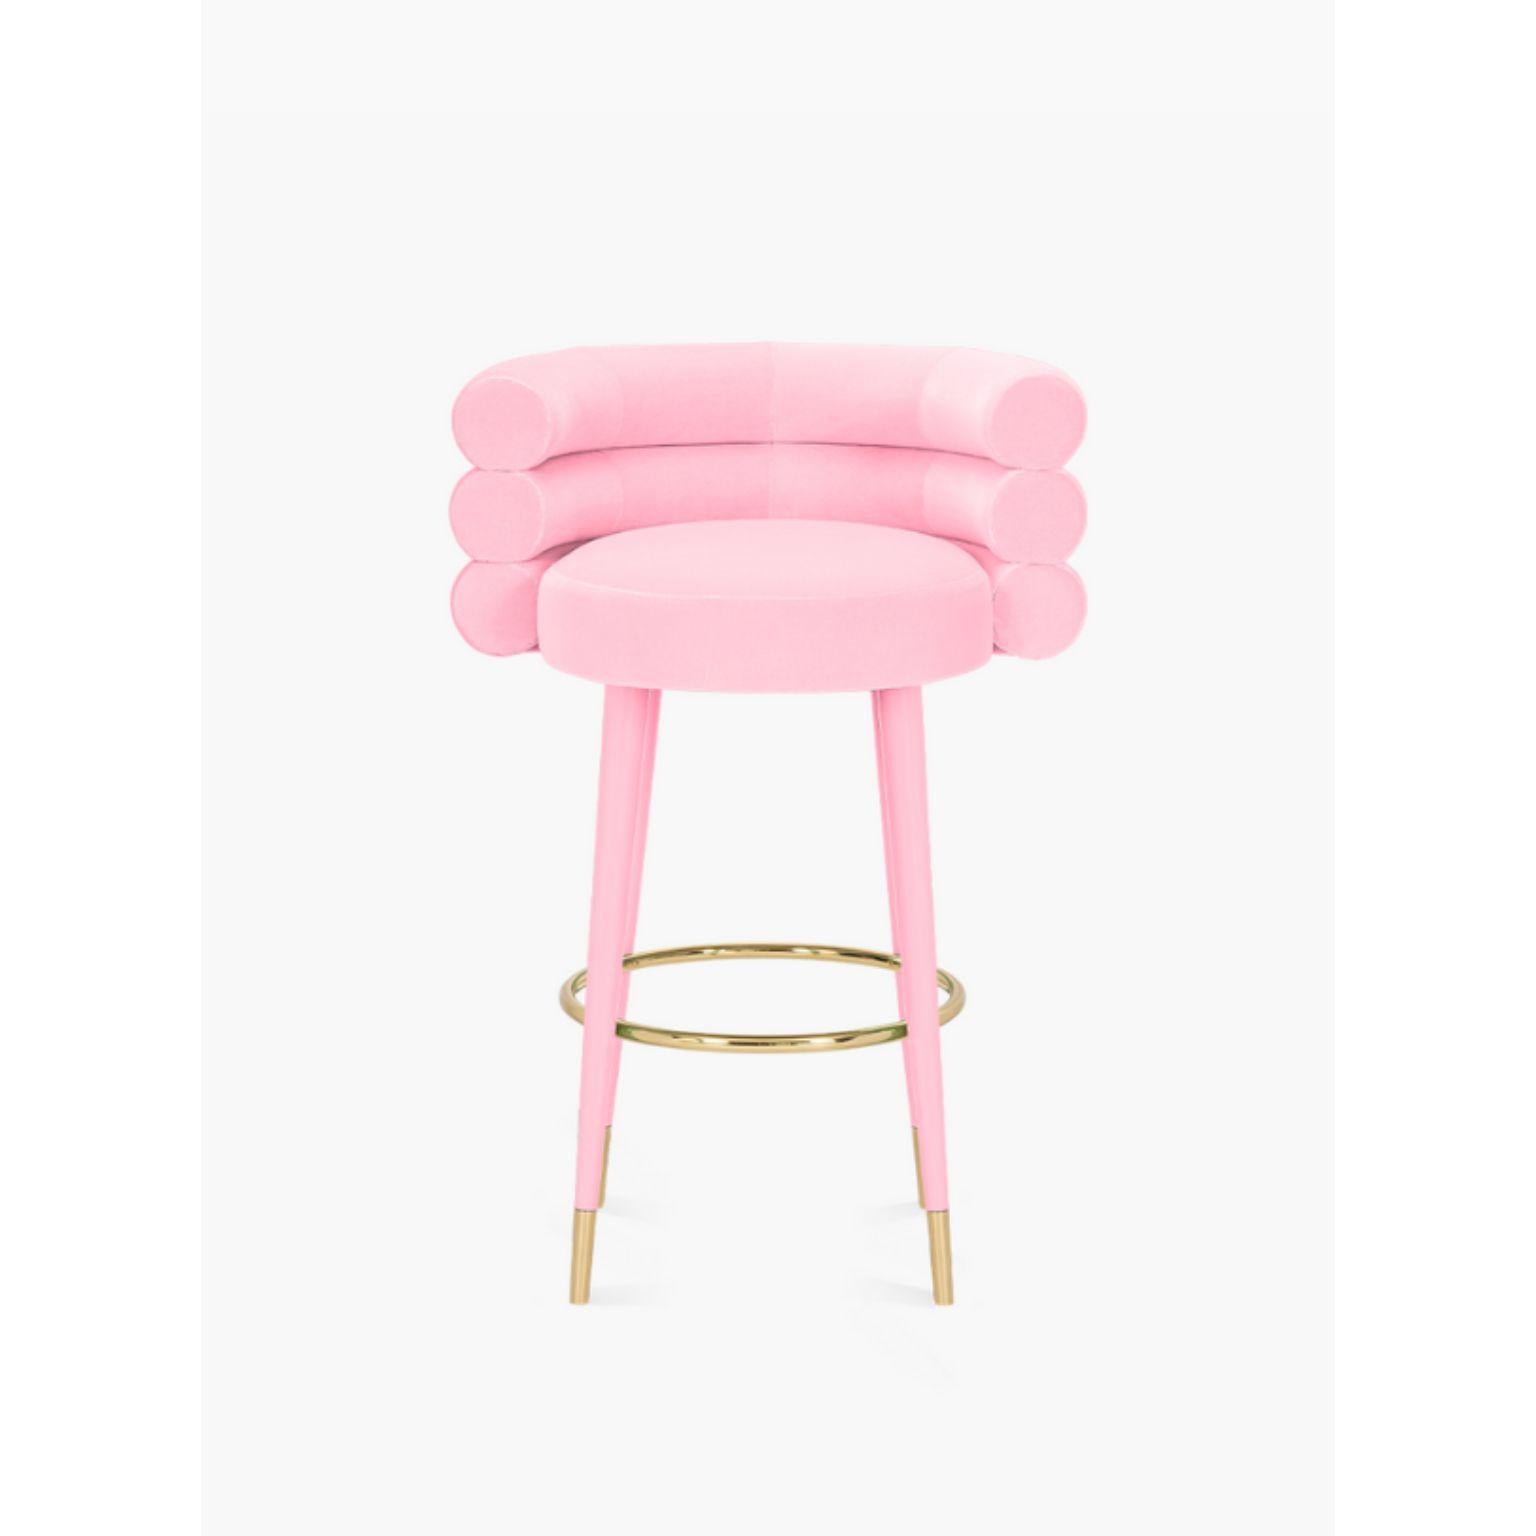 Marshmallow bar stool, royal stranger
Dimensions: 100 x 70 x 60 cm
Materials: Velvet pink upholstery, brass
Available in other color and finishes.

Royal stranger is an exclusive furniture brand determined to bring you the best unique pieces of